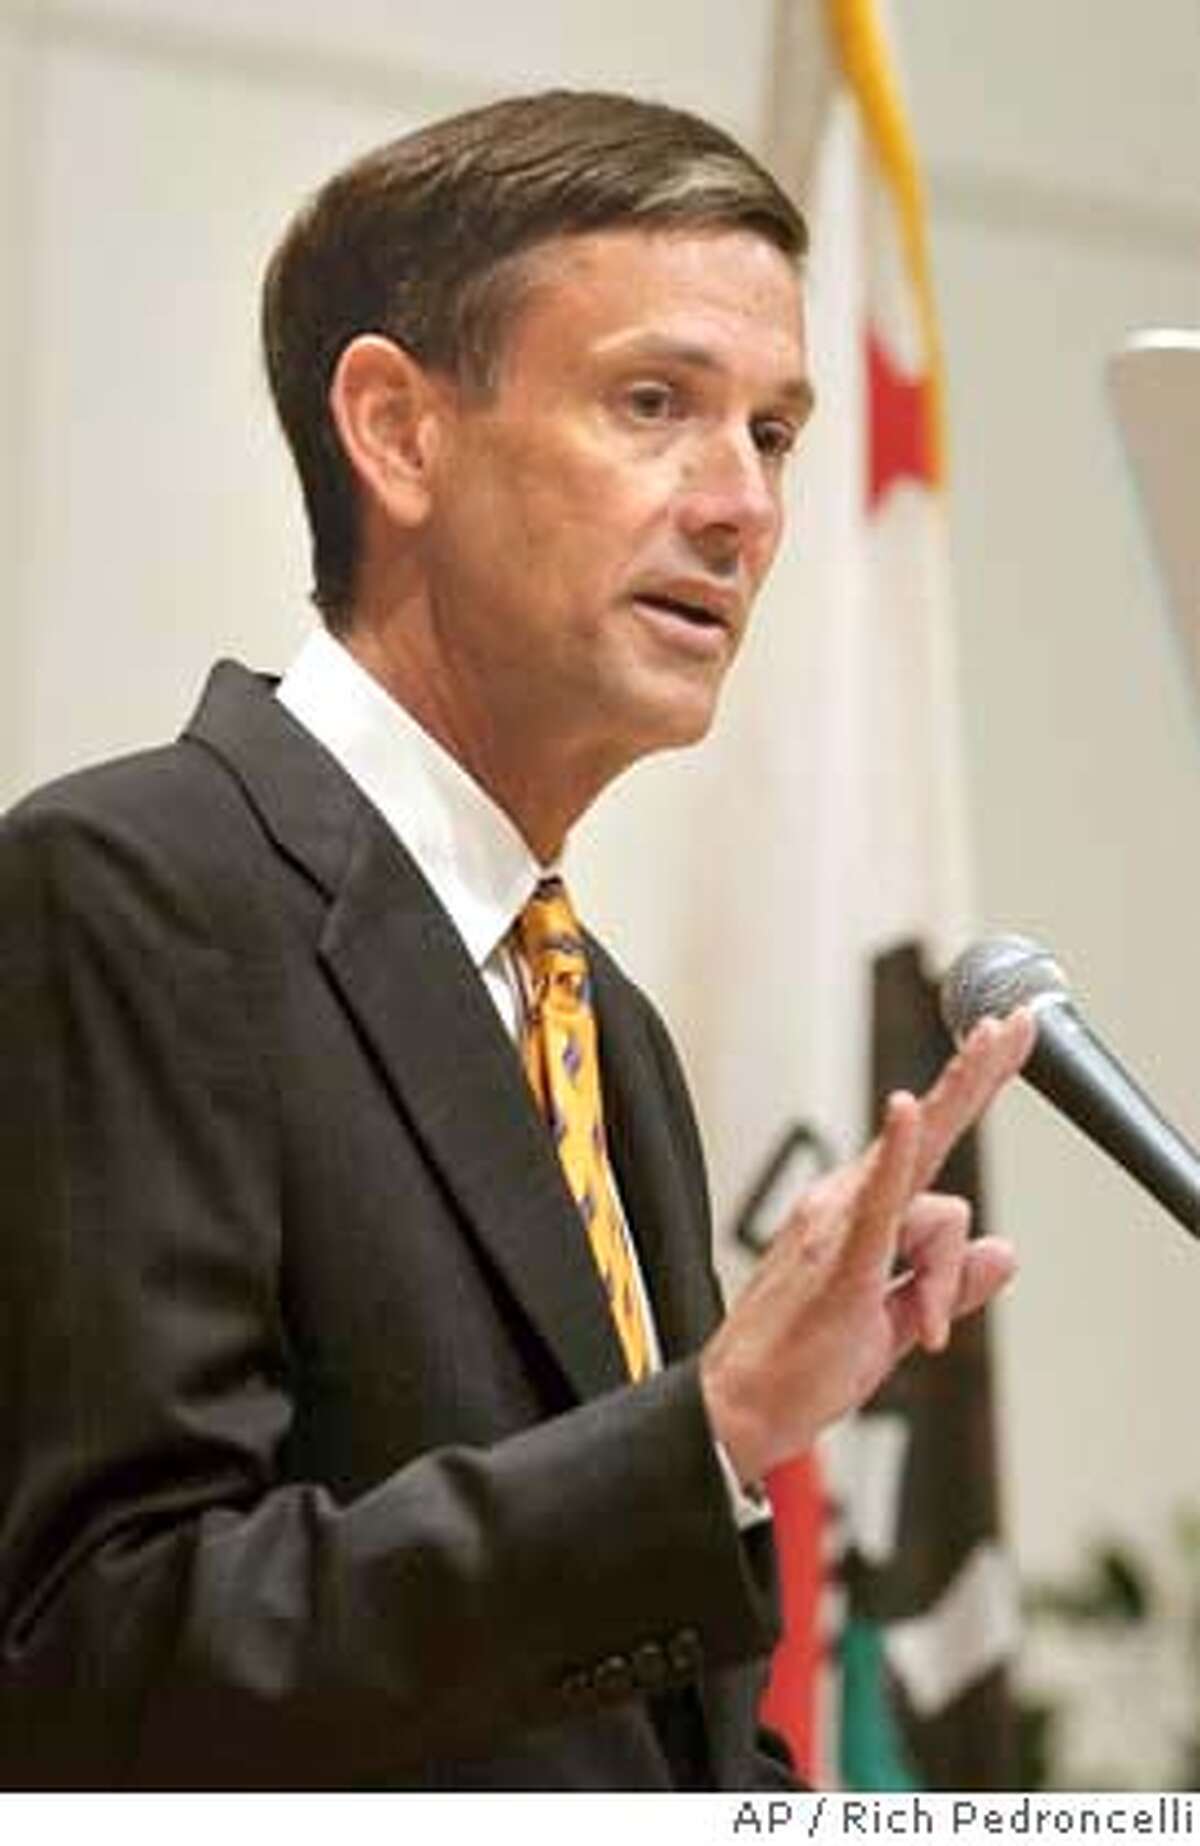 State schools chief Jack O'Connell calls for a renewed push to improve the state's high schools while delivering his first "State of Education in California" address in Sacramento, Calif., Wednesday, Feb. 11, 2004. (AP Photo/Rich Pedroncelli) ProductNameChronicle